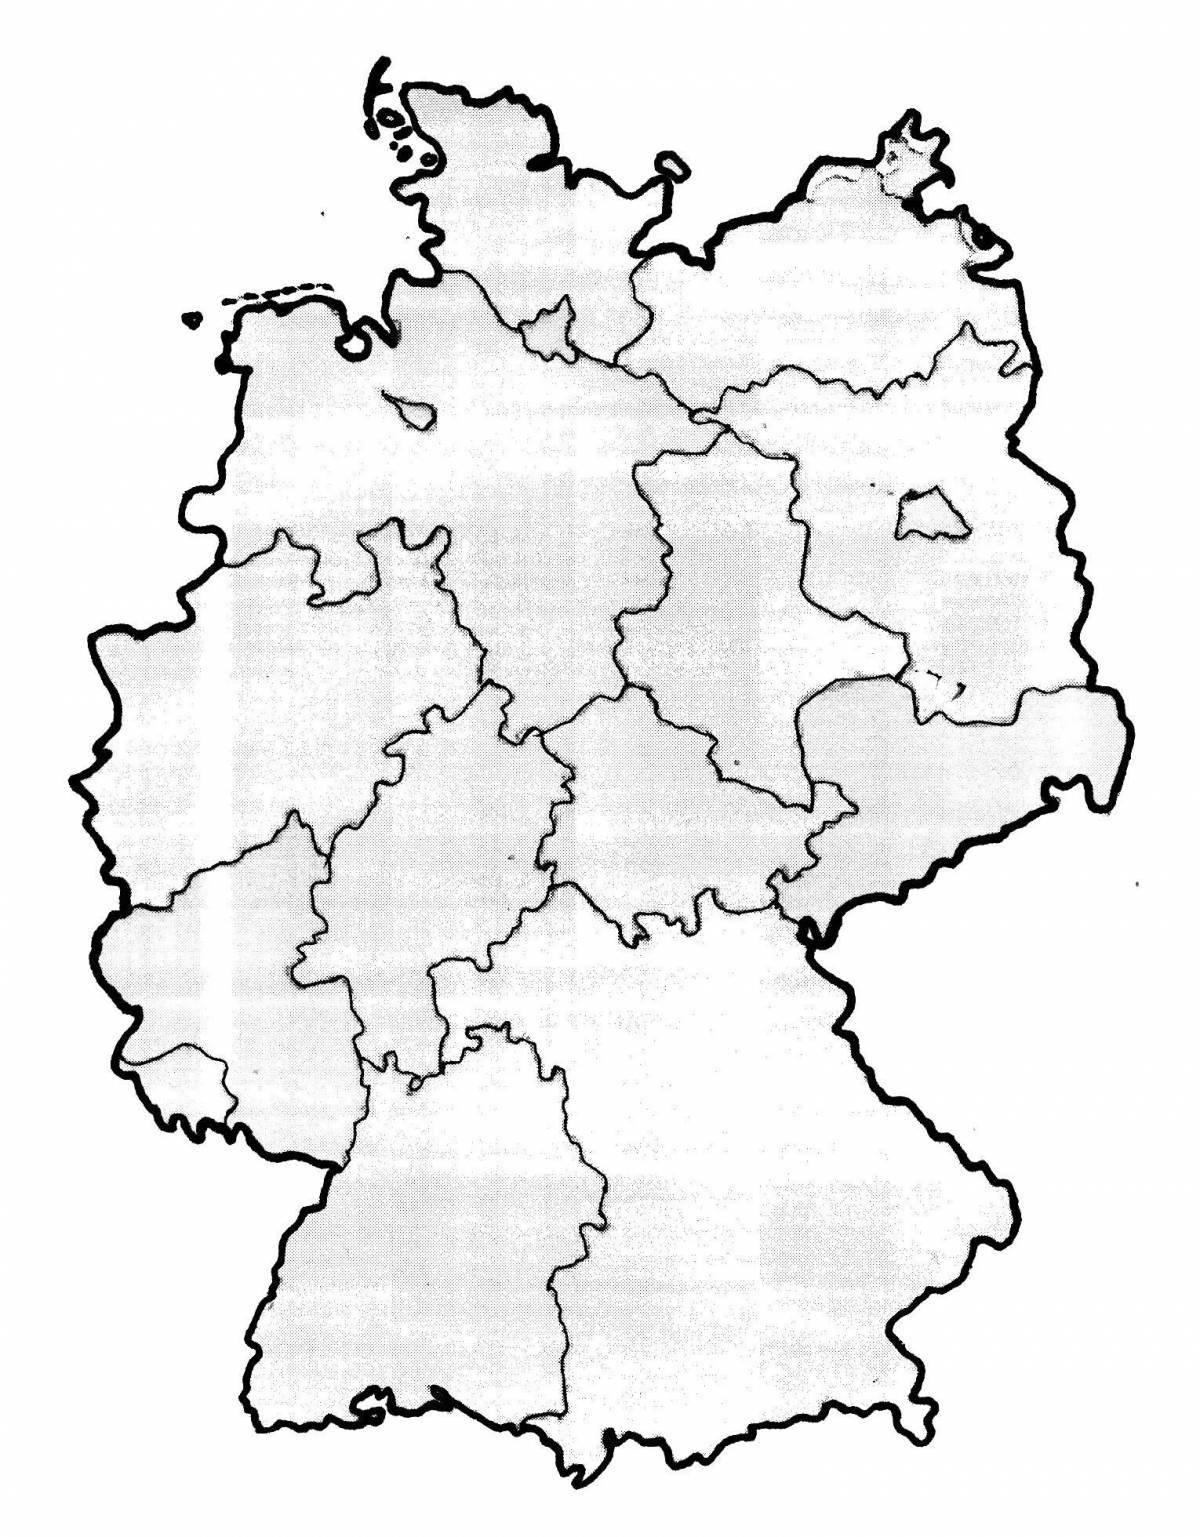 Coloring book charming map of germany